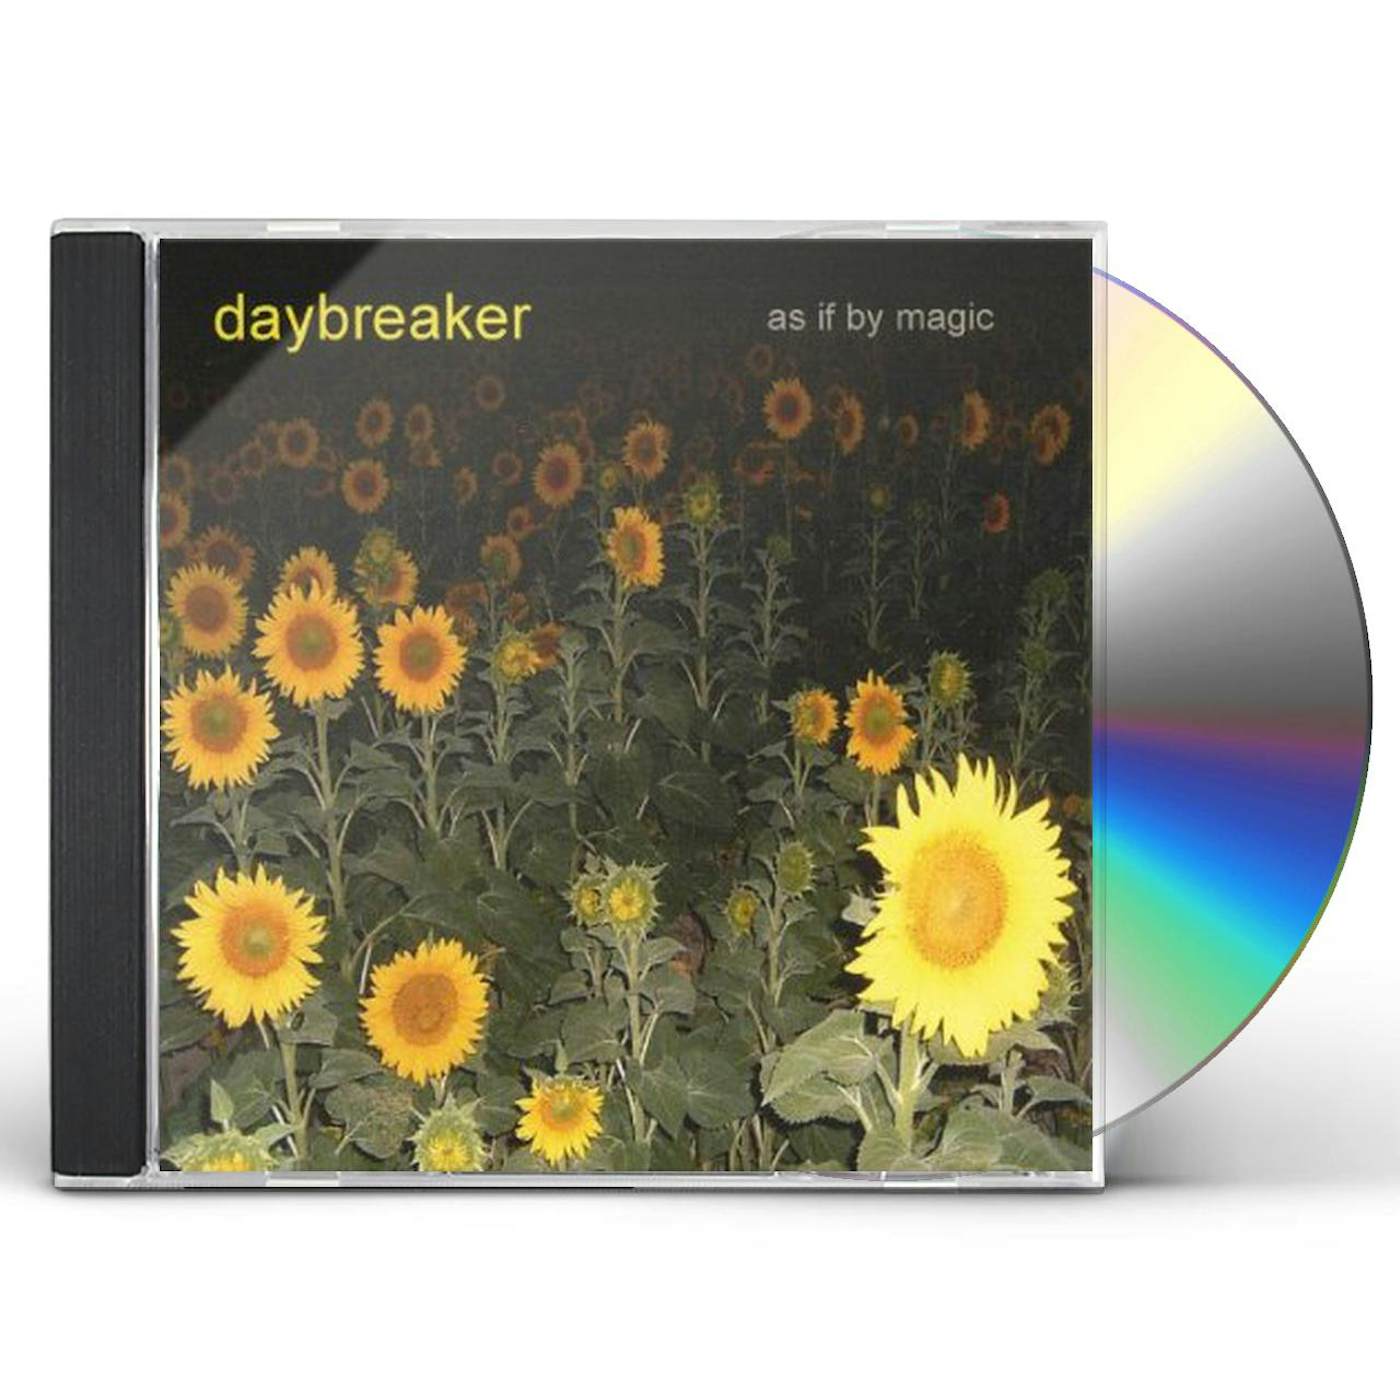 Daybreaker AS IF BY MAGIC CD